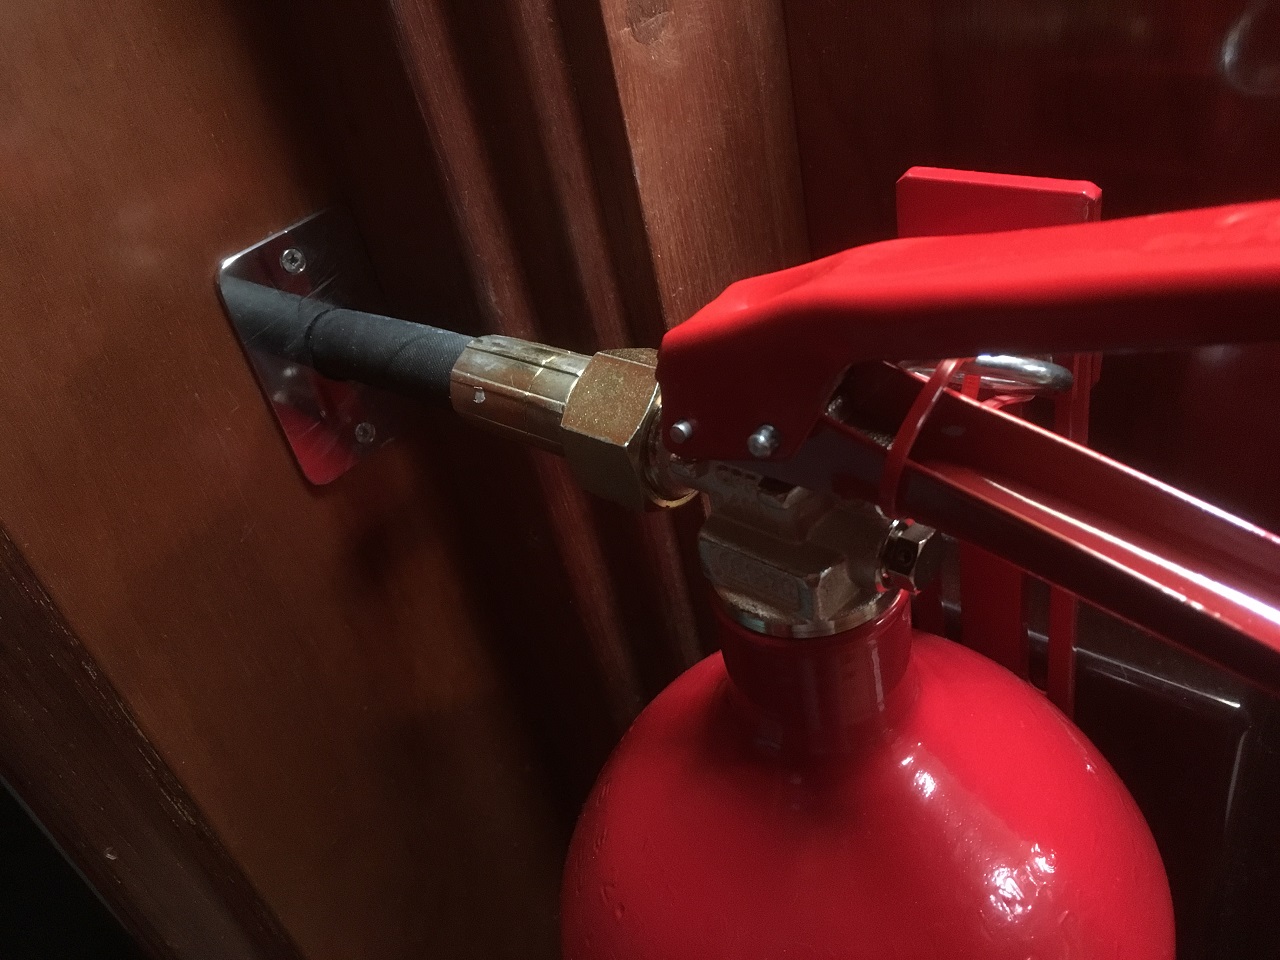 New CO2 fire extinguisher